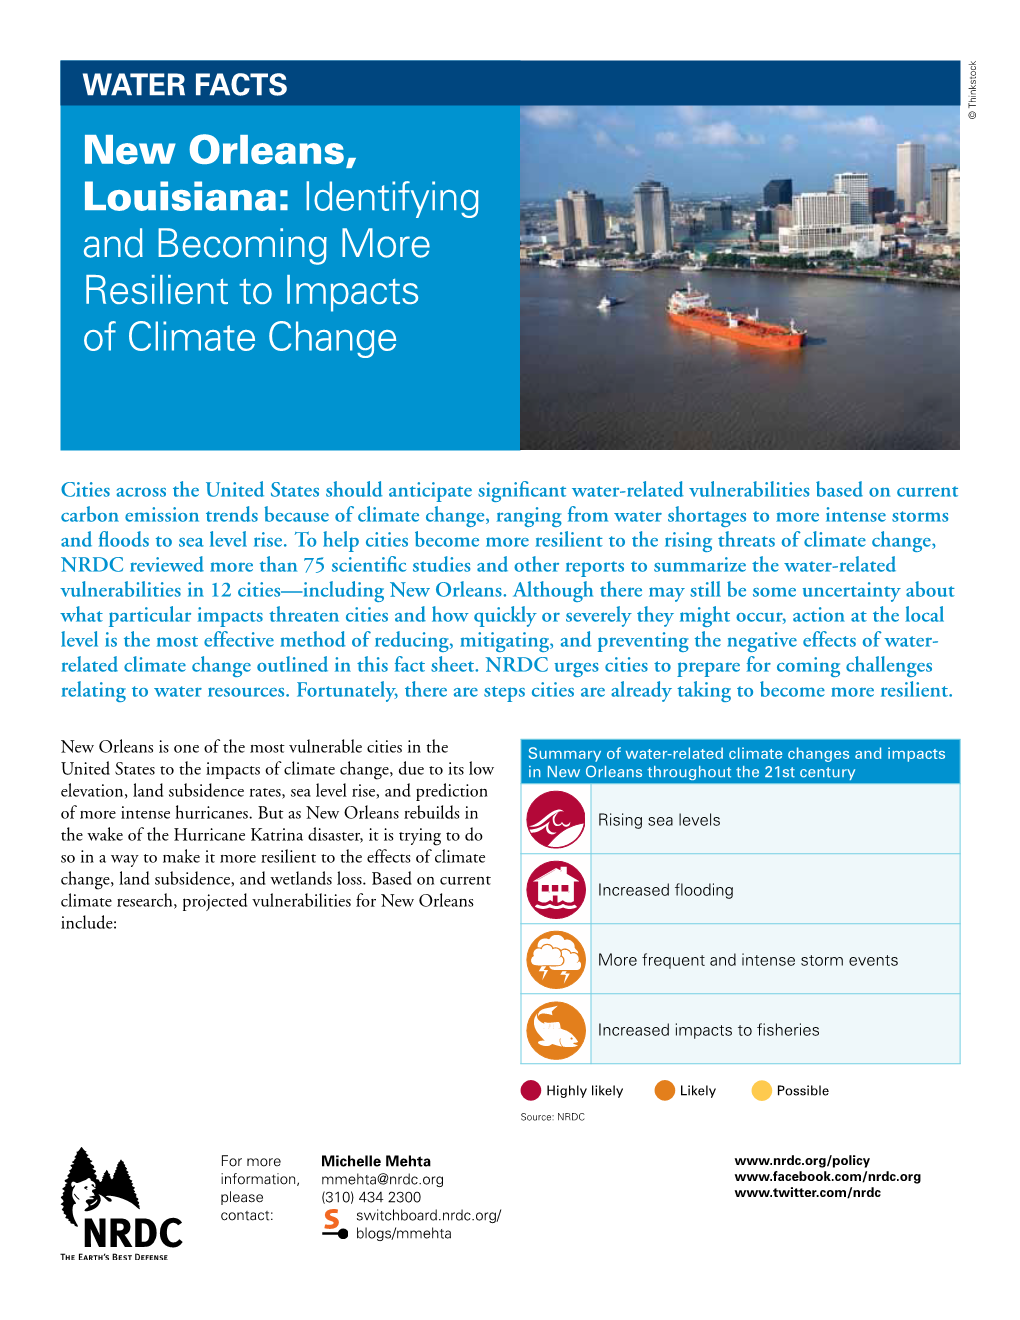 New Orleans, Louisiana-Identifying and Becoming More